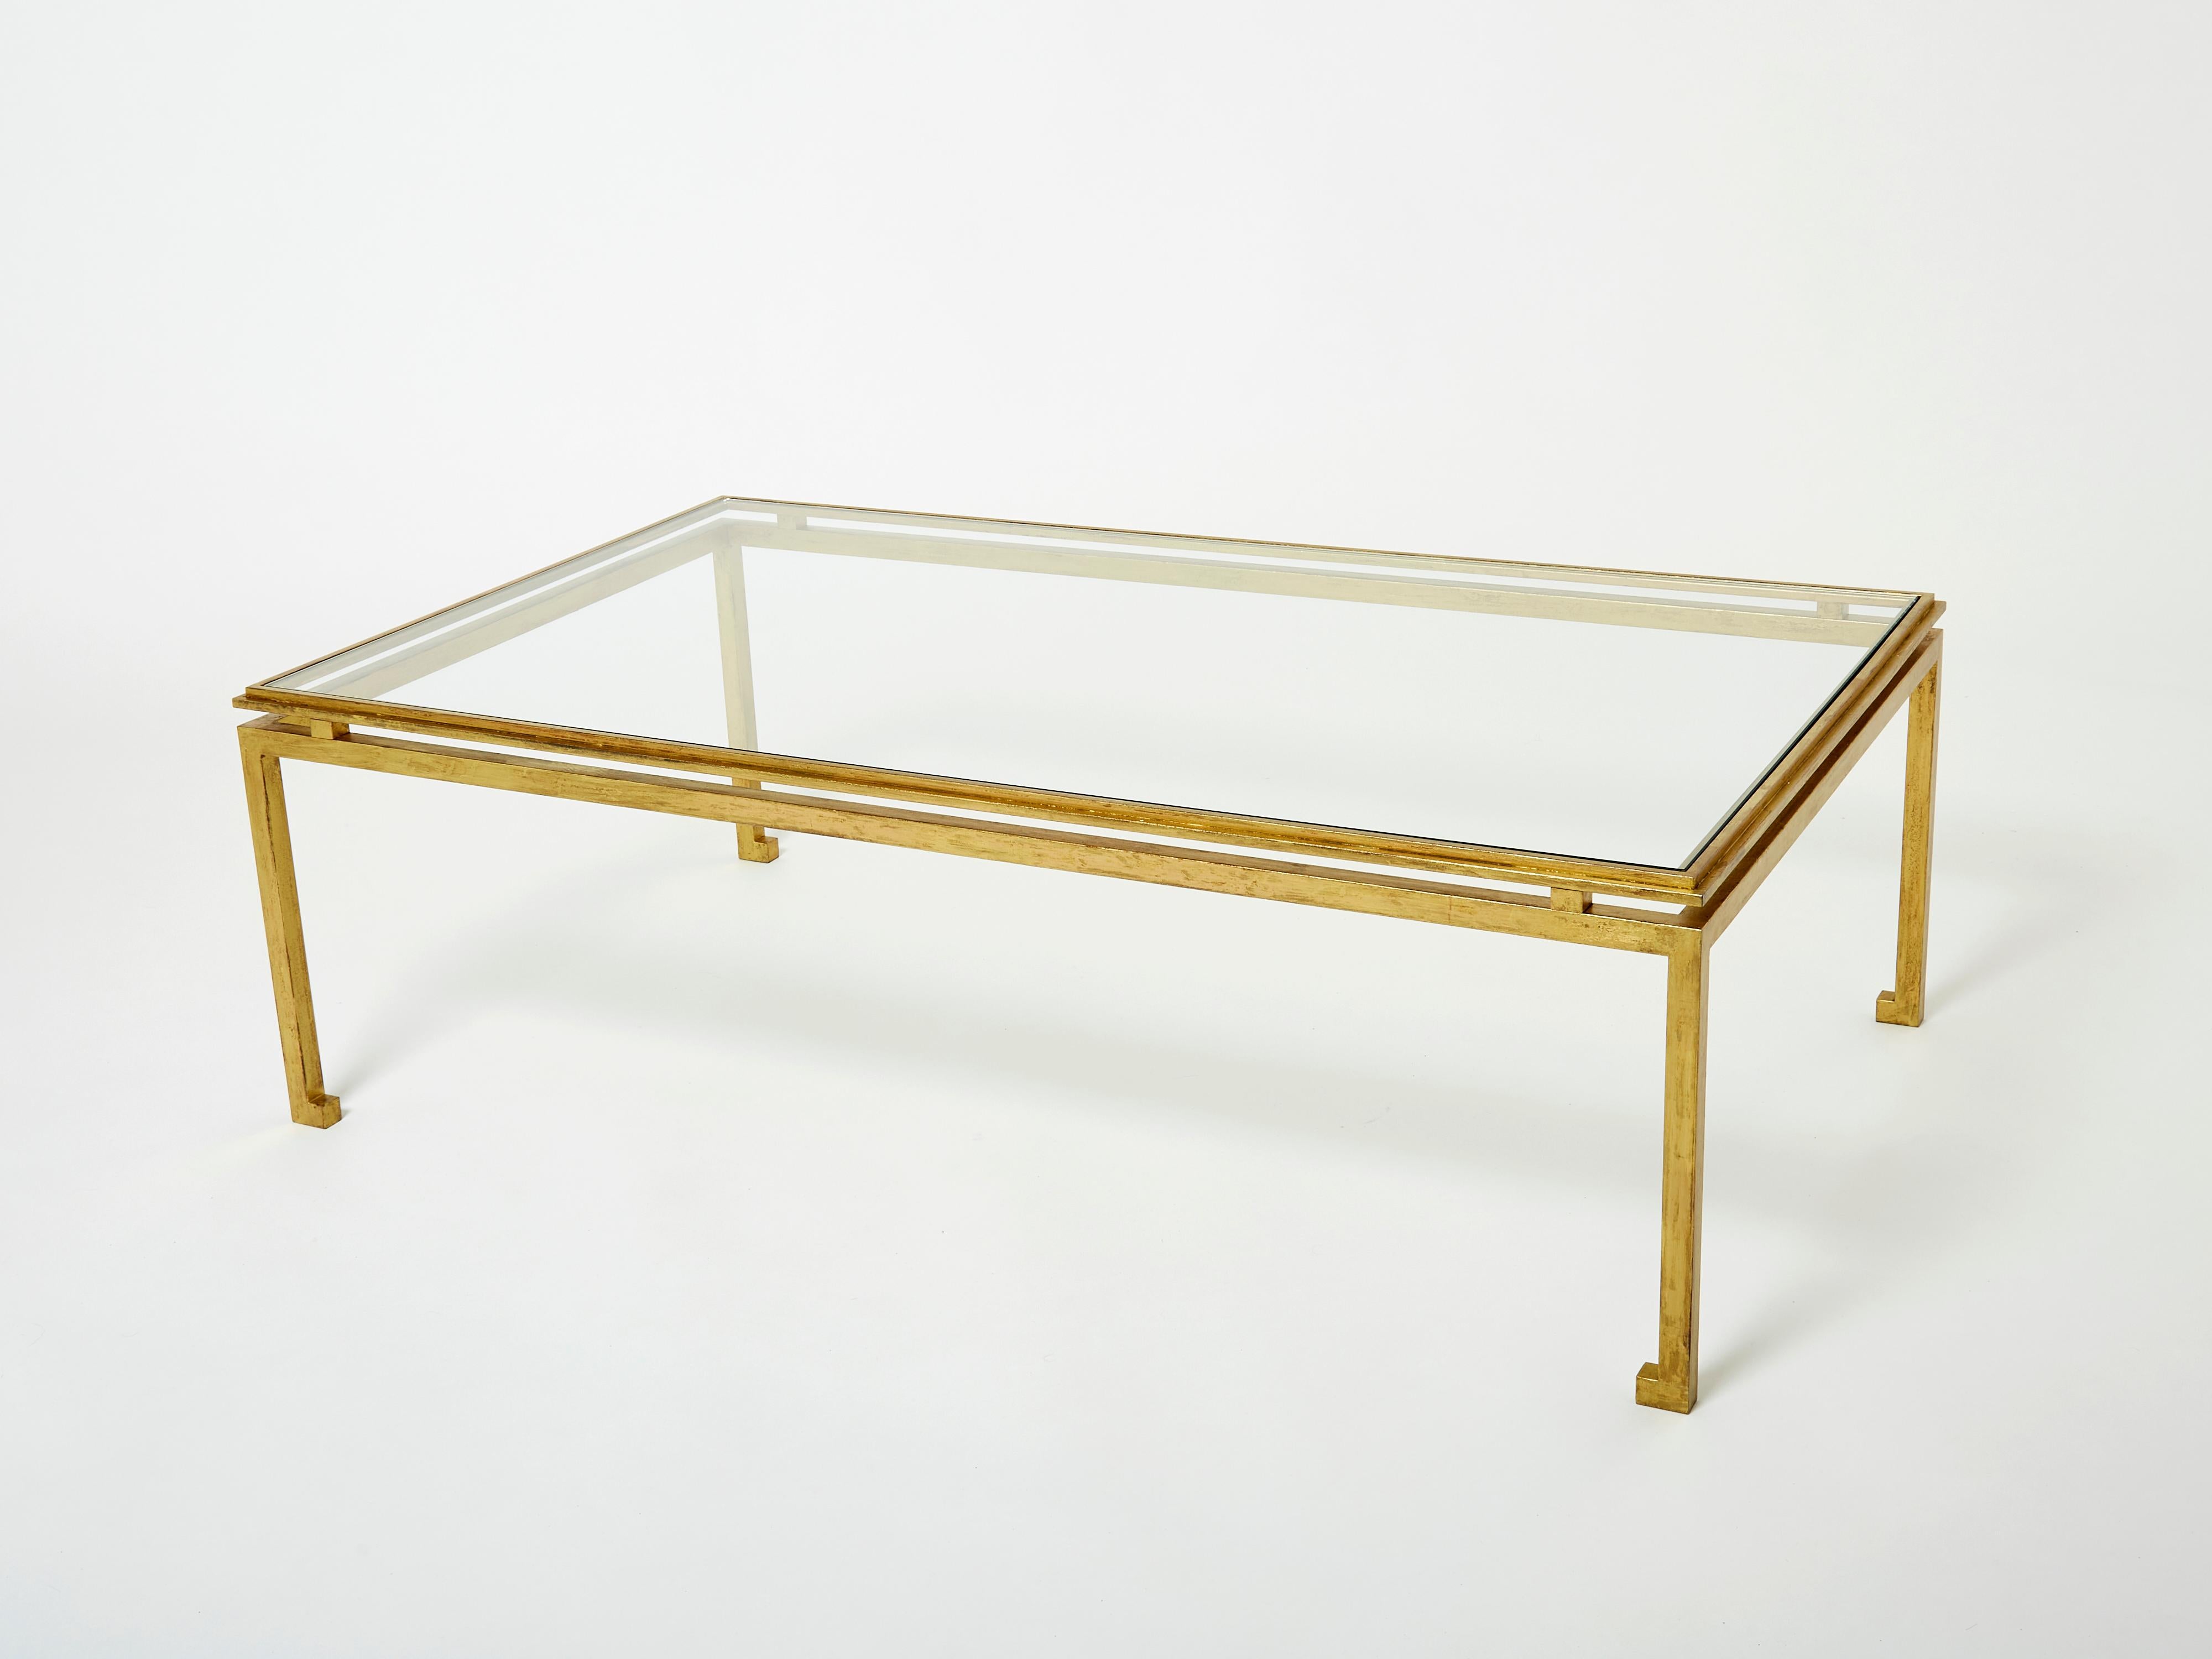 This beautiful coffee table by Maison Ramsay is from the 1950s, and carries with it the elegant mood of the neoclassical post art deco period. The wrought iron feet are glittering in an antiqued gold gilt finish, while the transparent glass top